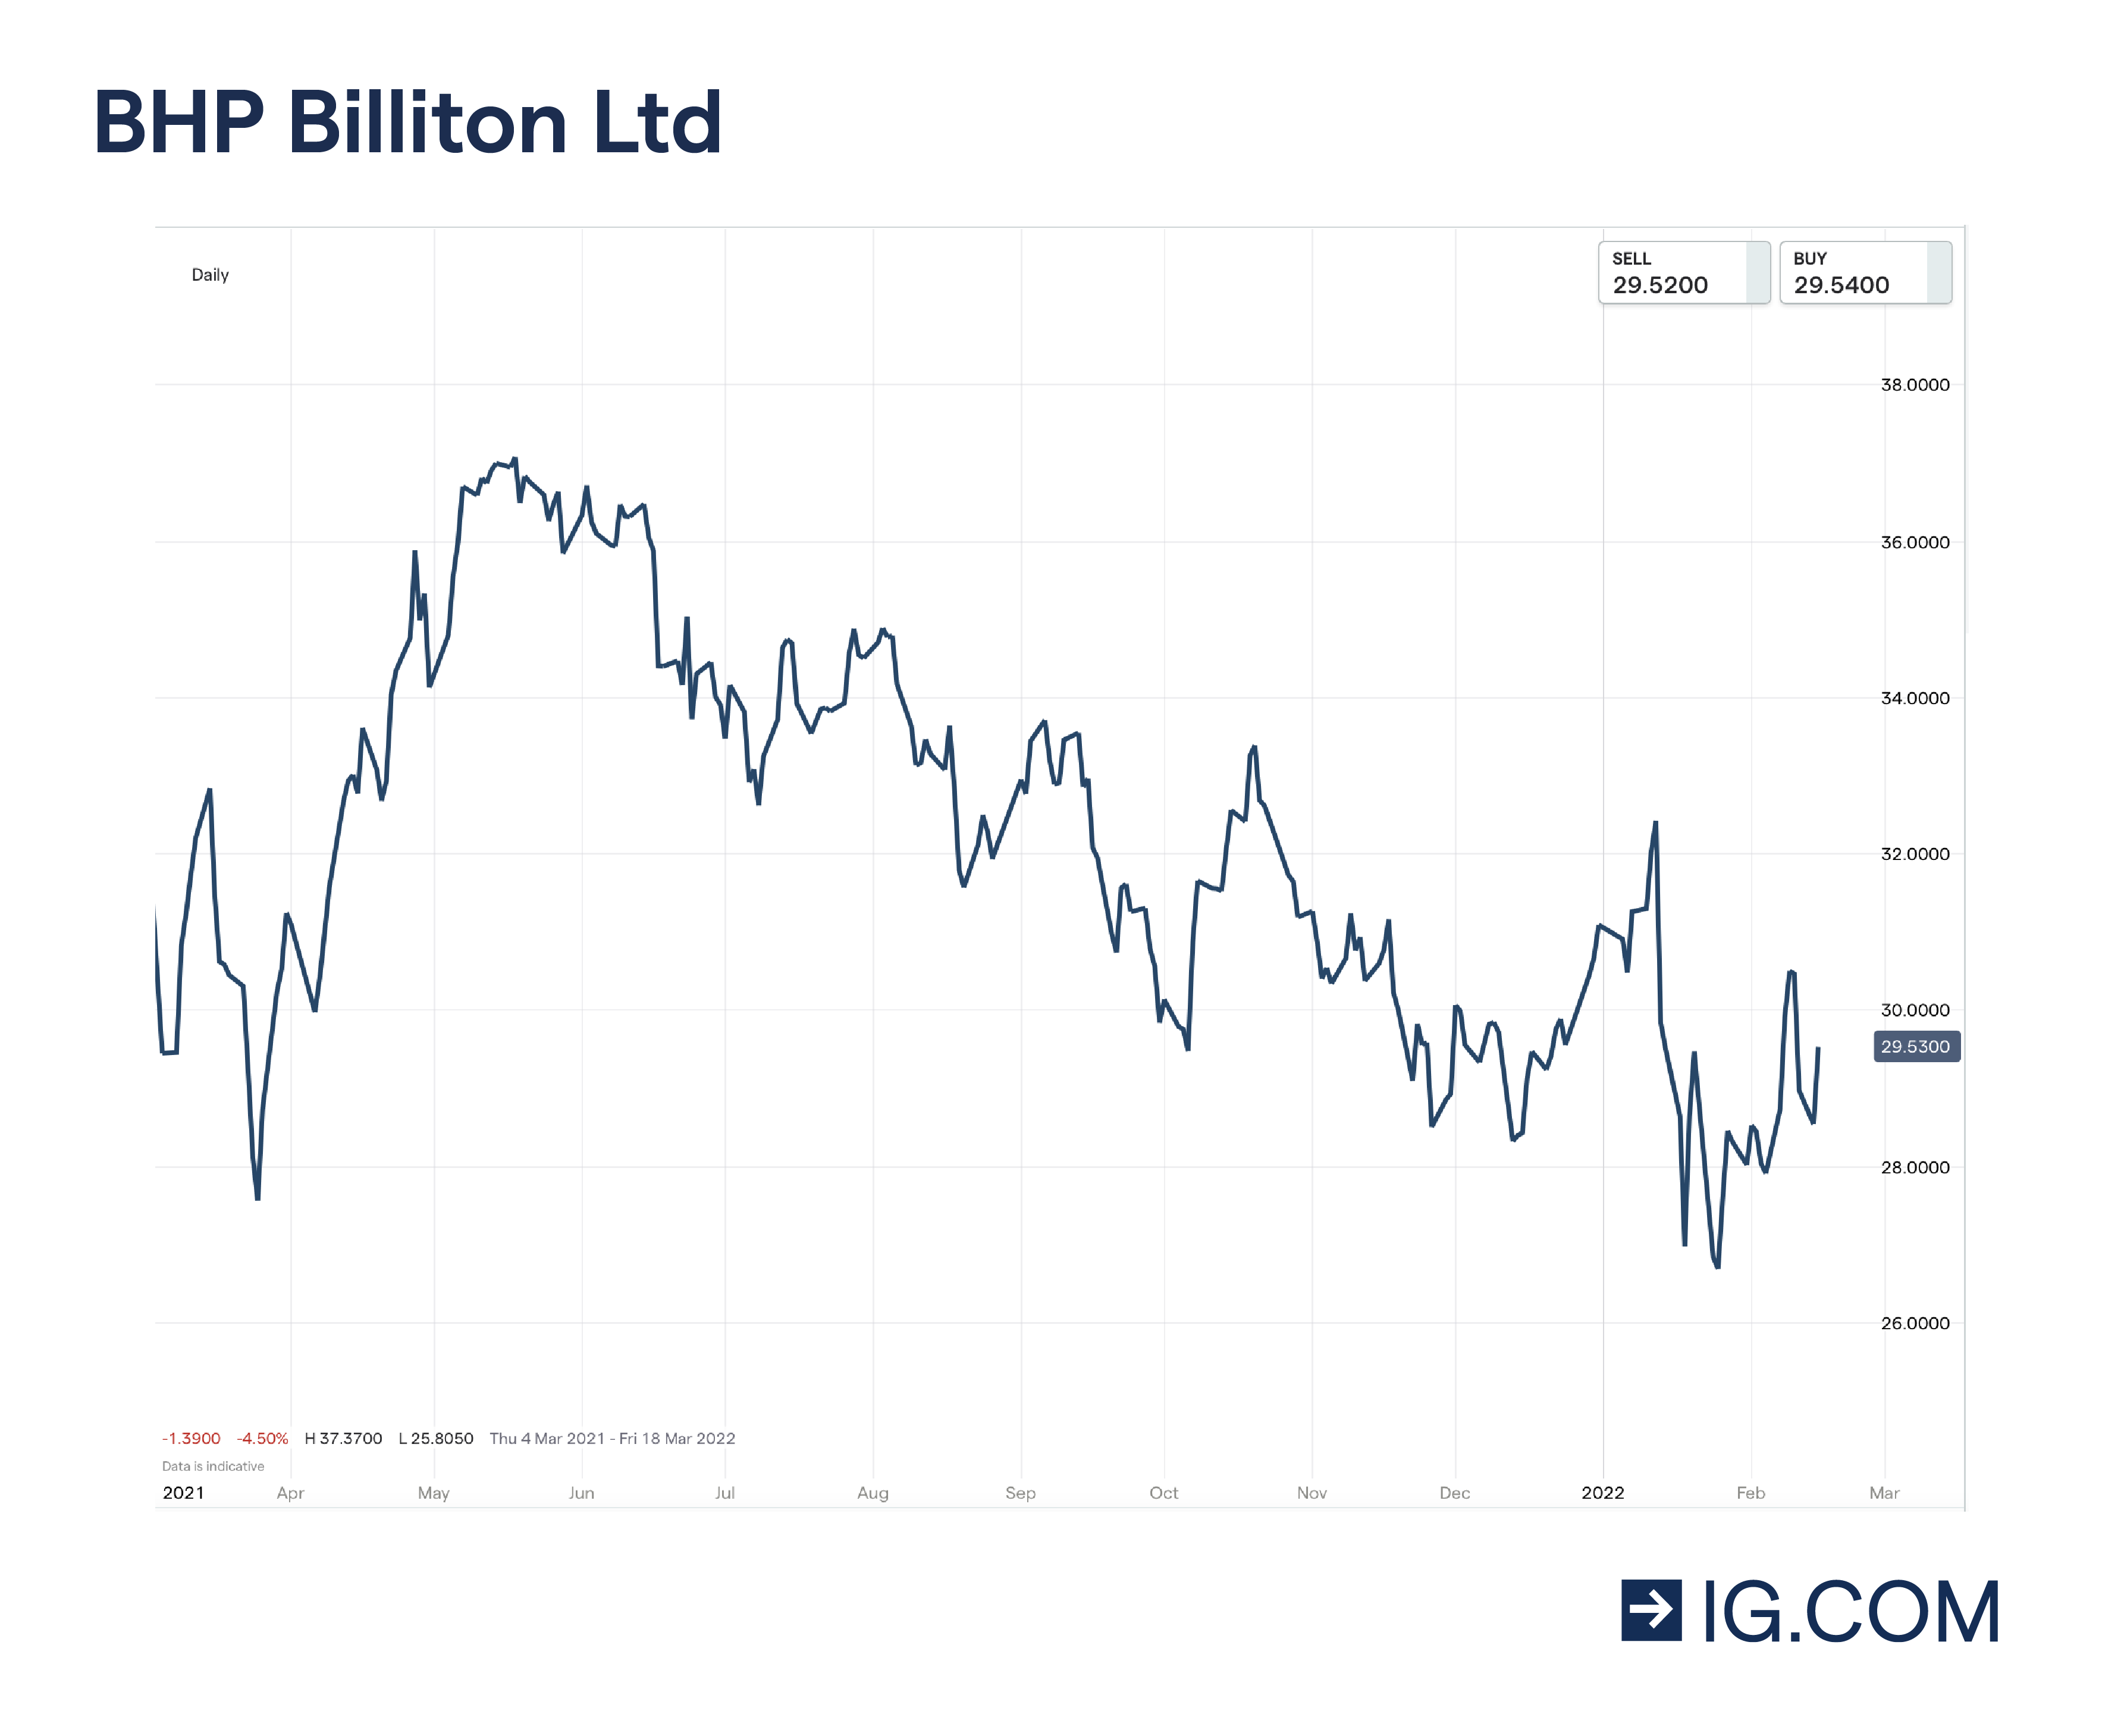 BHP Billiton stock chart of the share price movement over the last 12 months